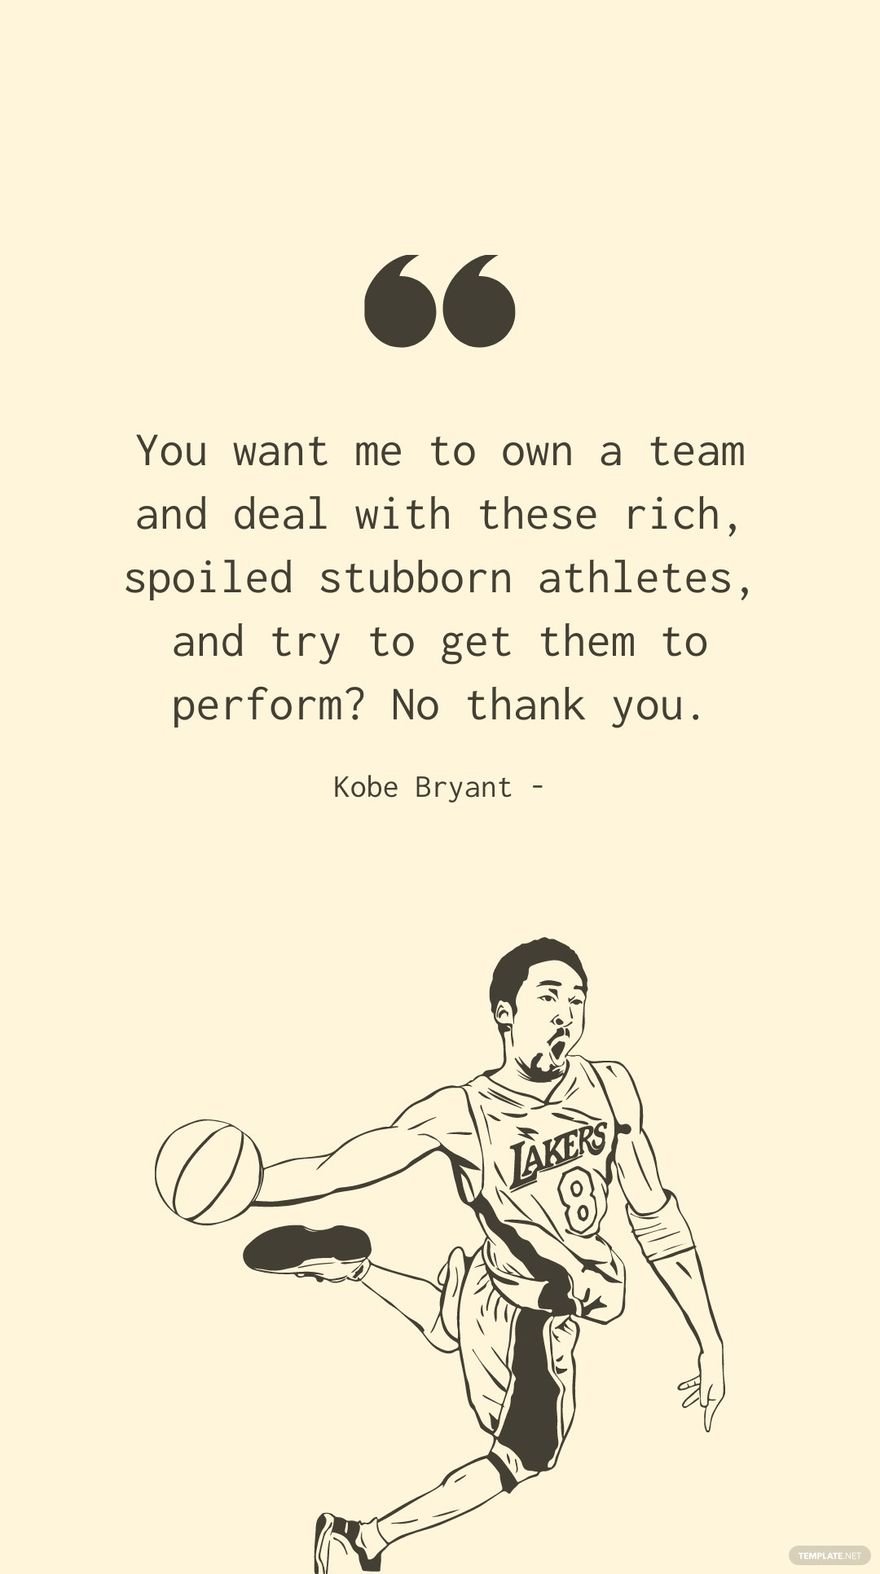 Kobe Bryant - You want me to own a team and deal with these rich, spoiled stubborn athletes, and try to get them to perform? No thank you.